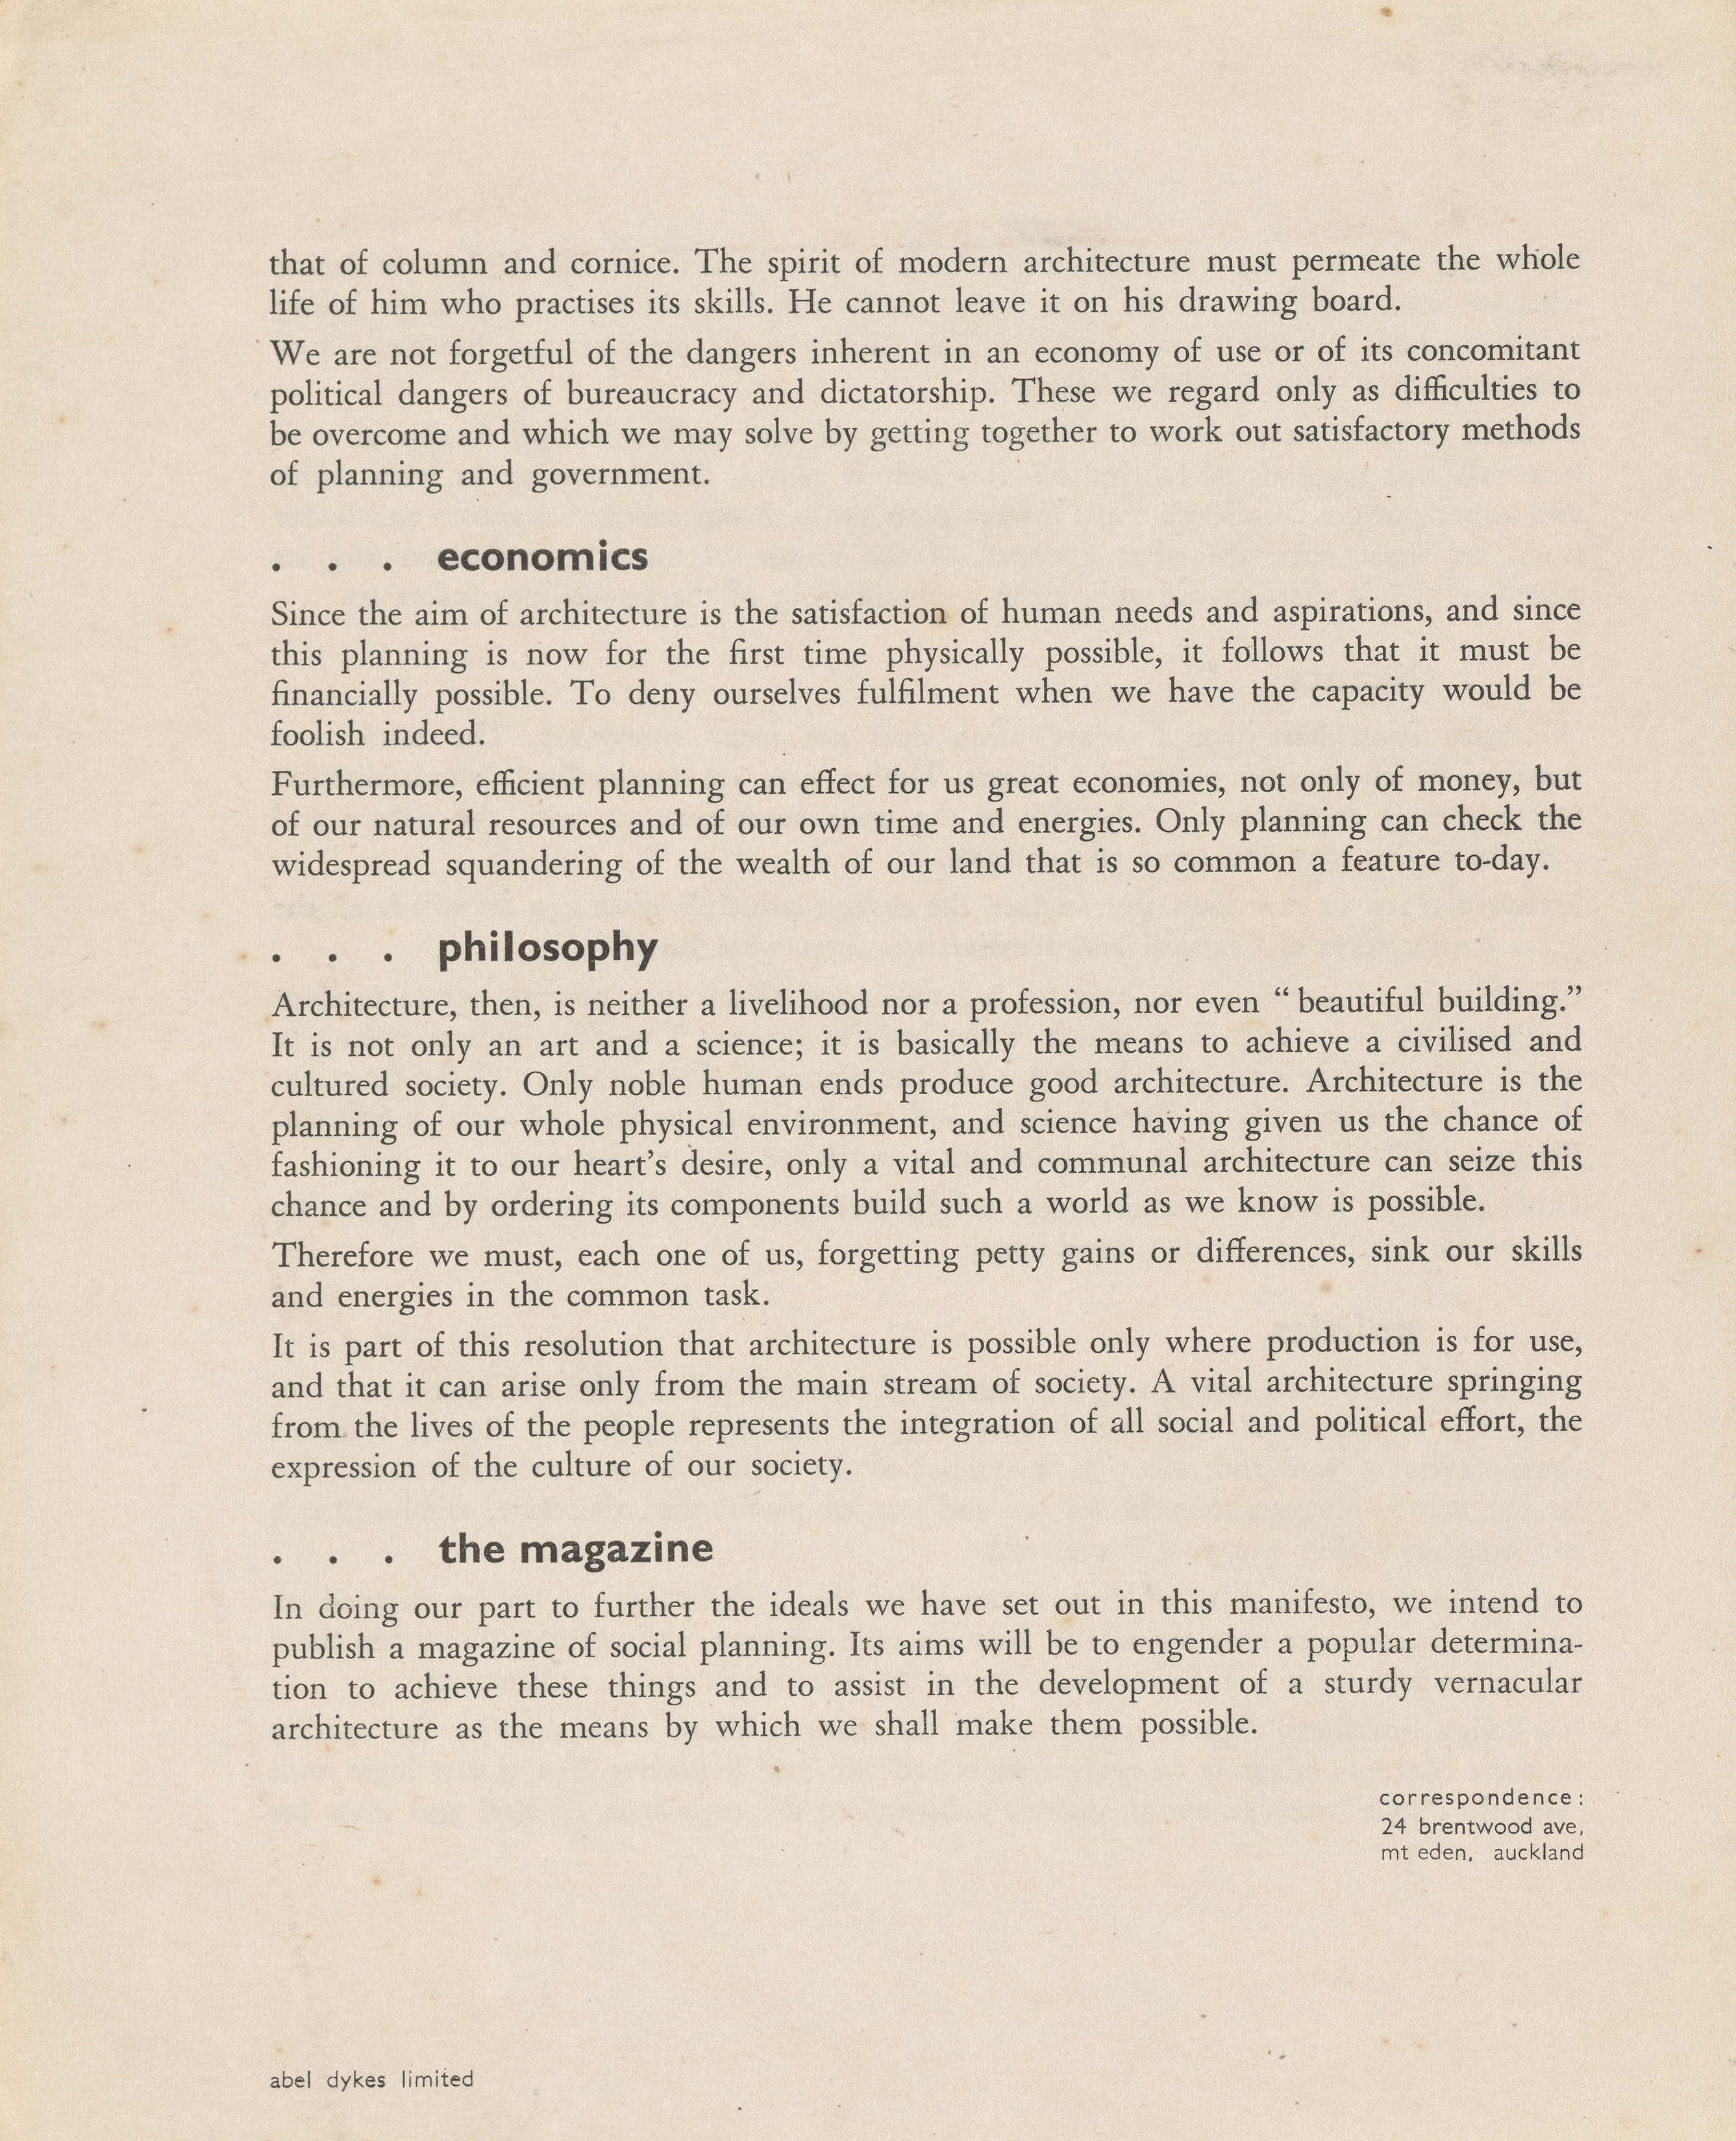 A scan of text on sepia-coloured paper